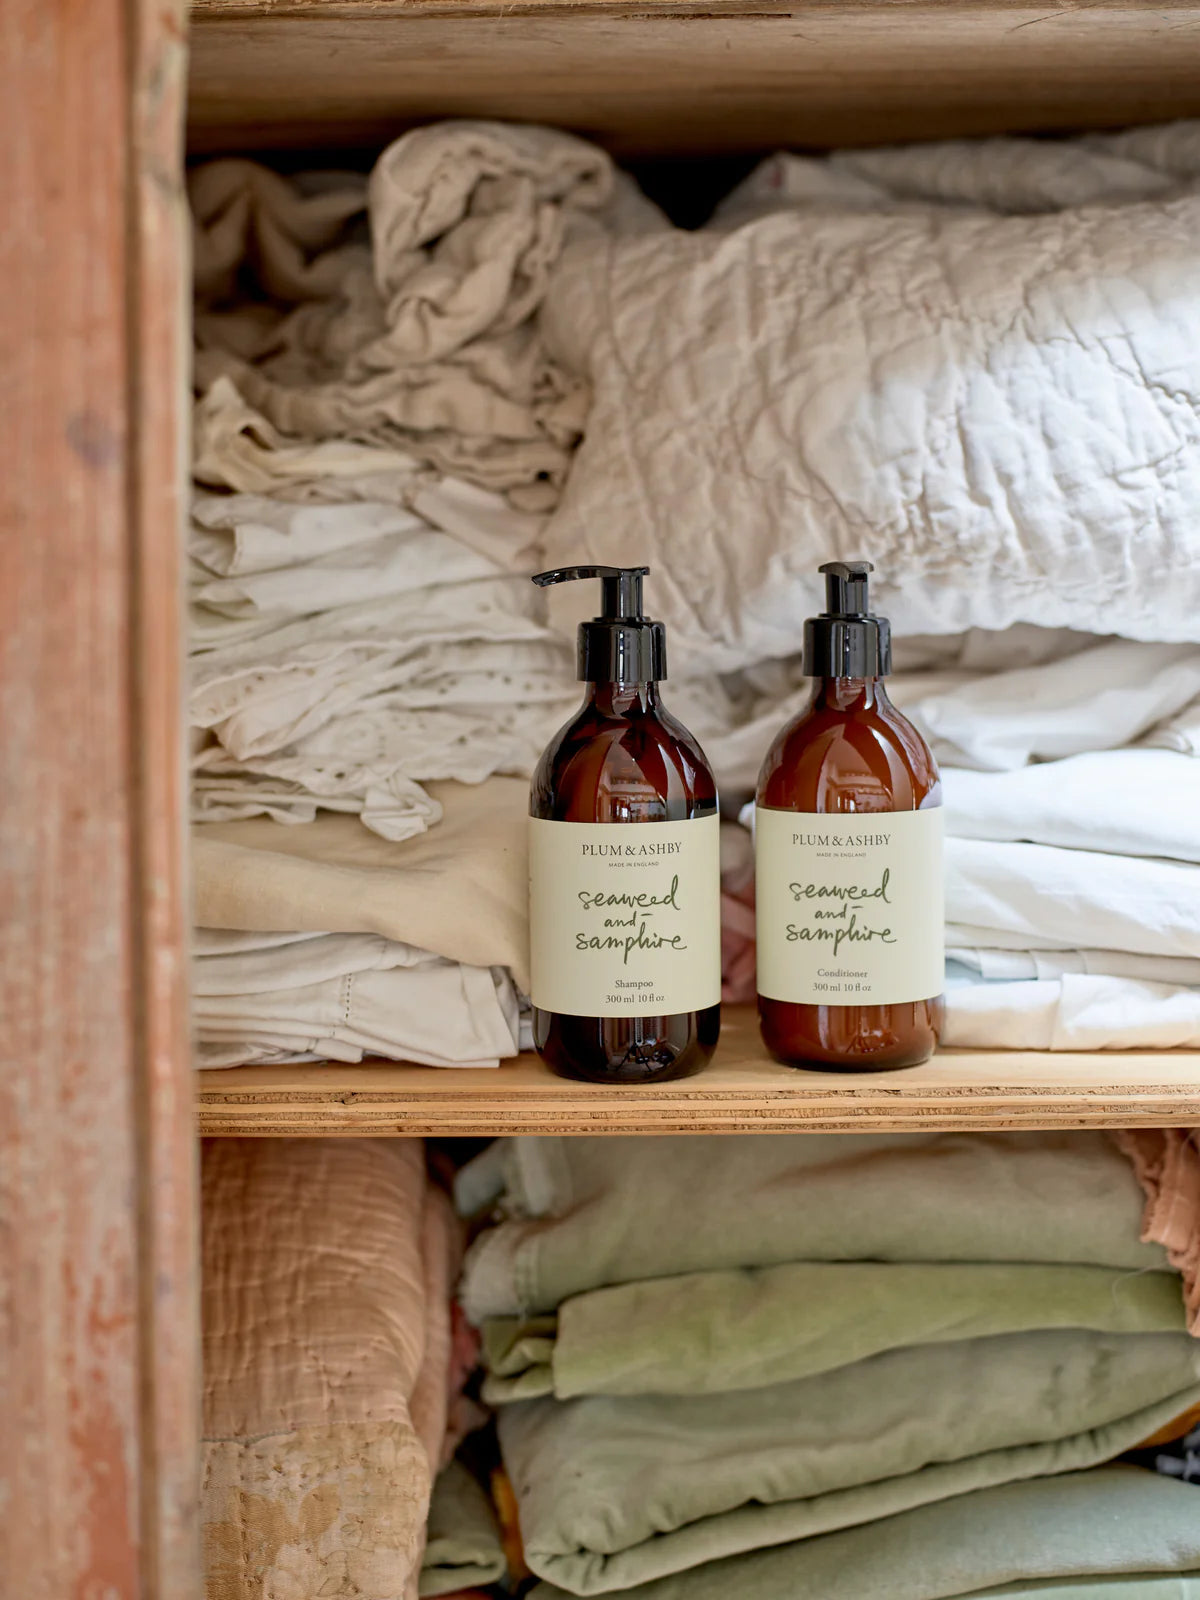 Laundry cupboard with two dark brown glass bottles, black pump dispensers, white labels with sage green writing, seaweed and samphire shampoo and conditioner by Plum and Ashby